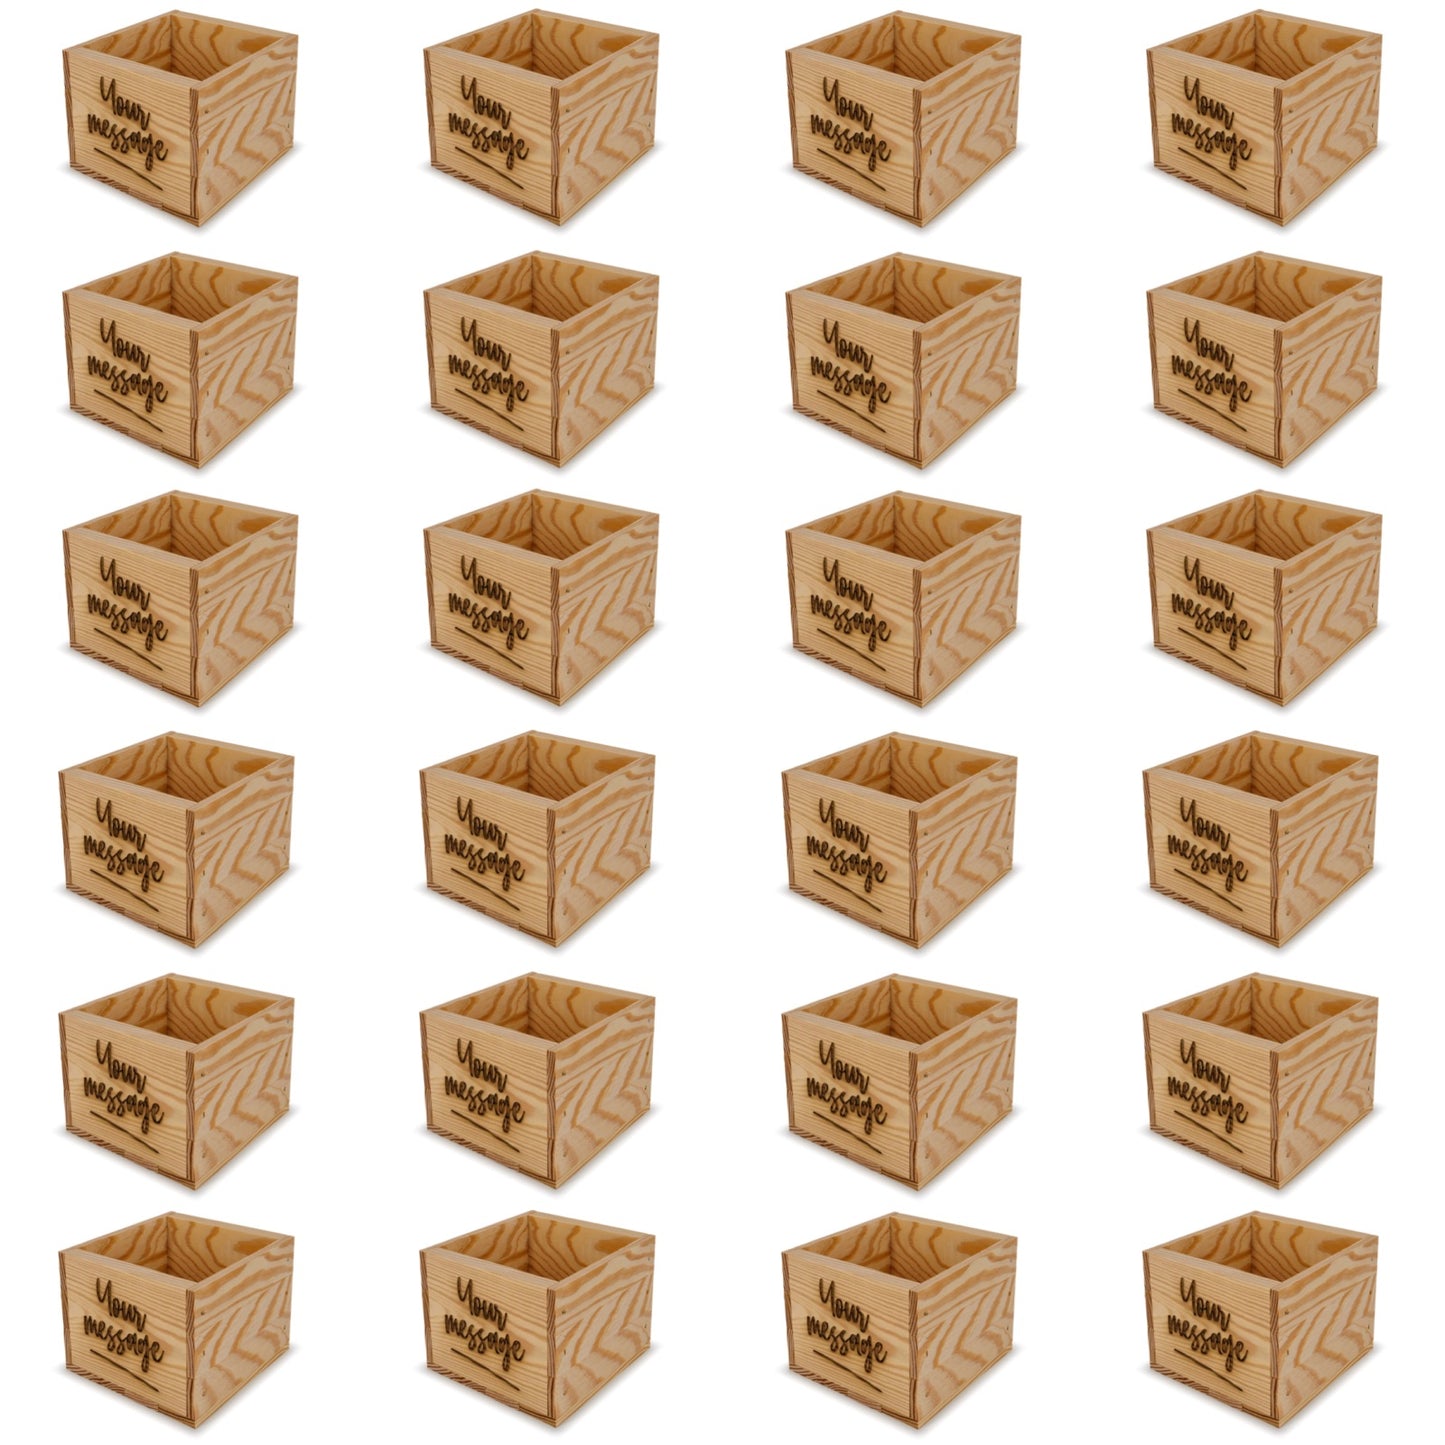 24 Small wooden crates with custom message 6x6.25x5.25